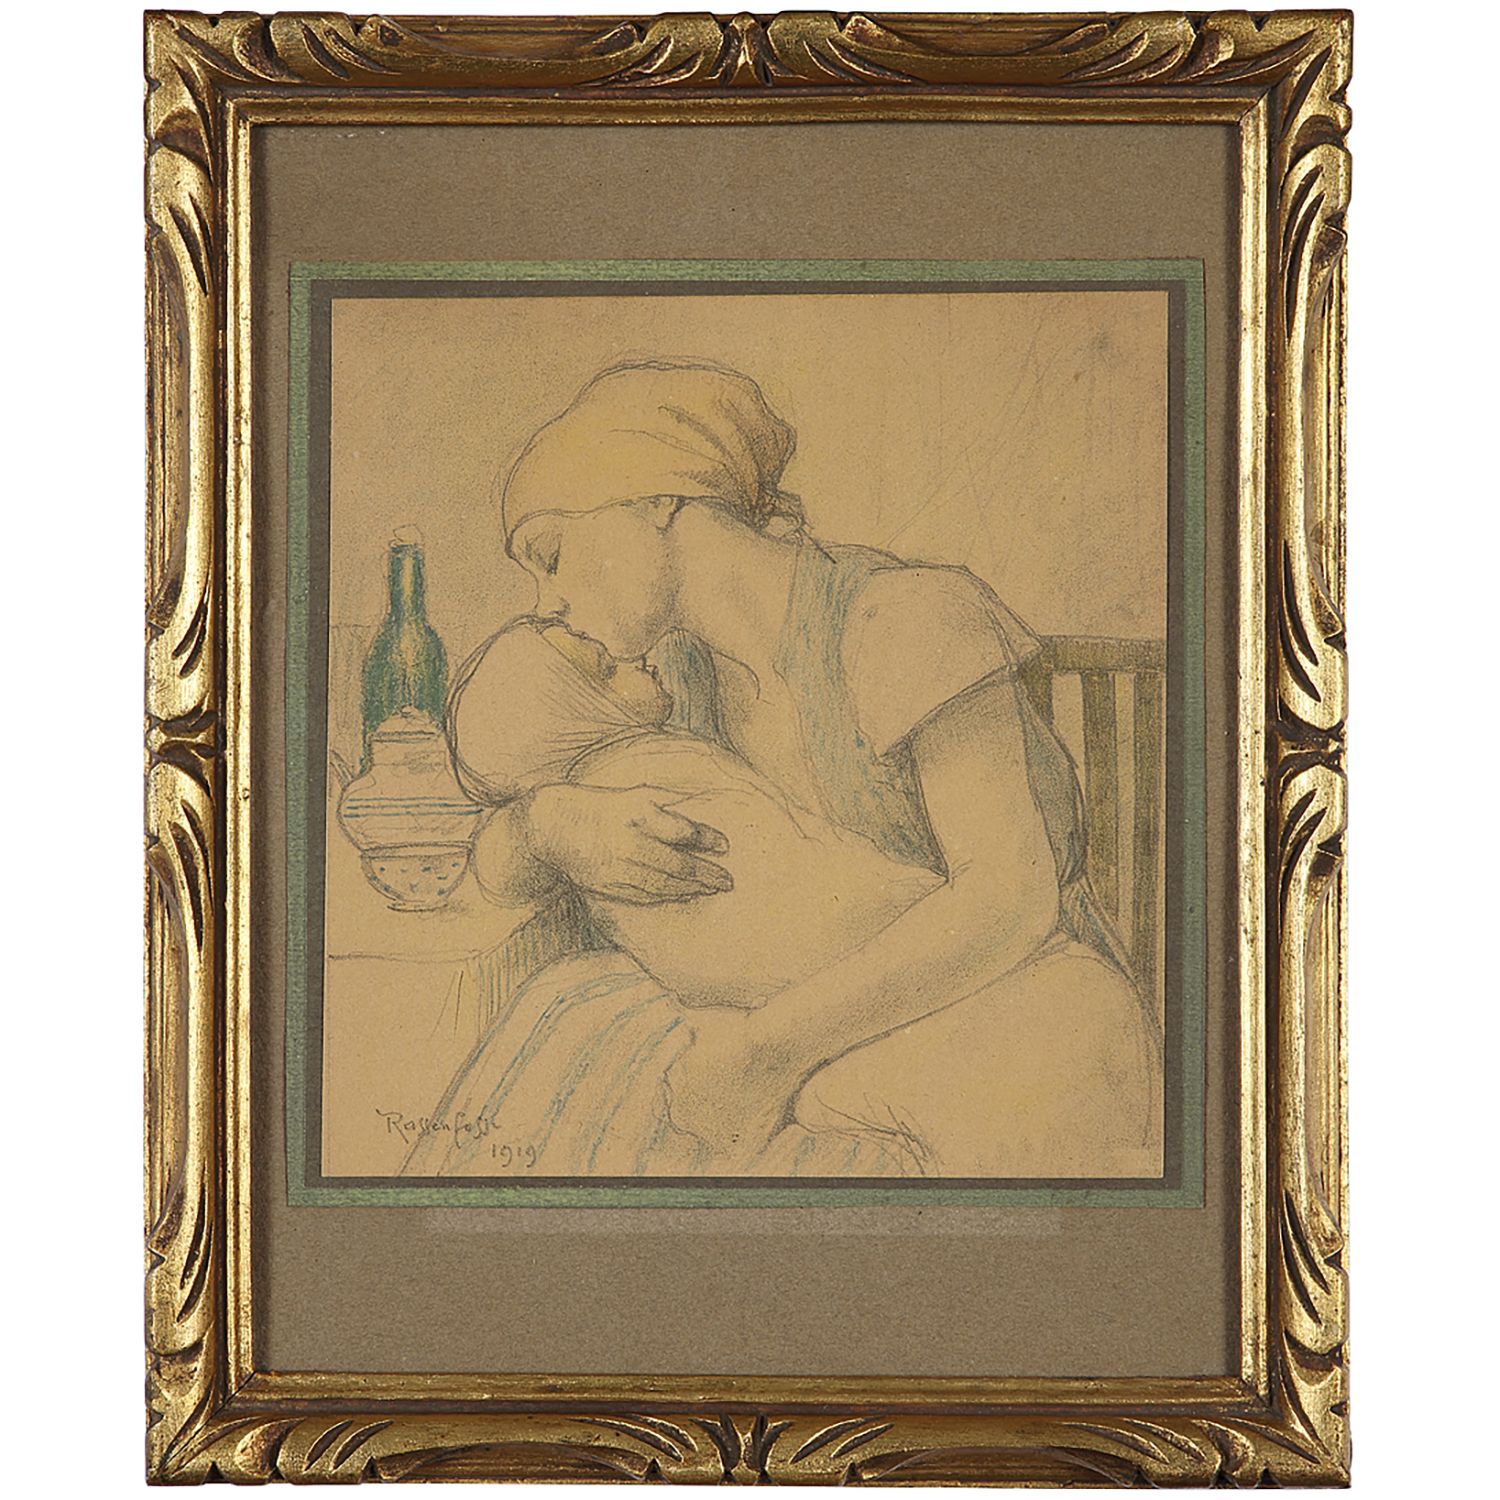 Null ARMAND RASSENFOSSE (1862-1934)

MOTHER KISSING HER CHILD, 1919

Pencil and &hellip;